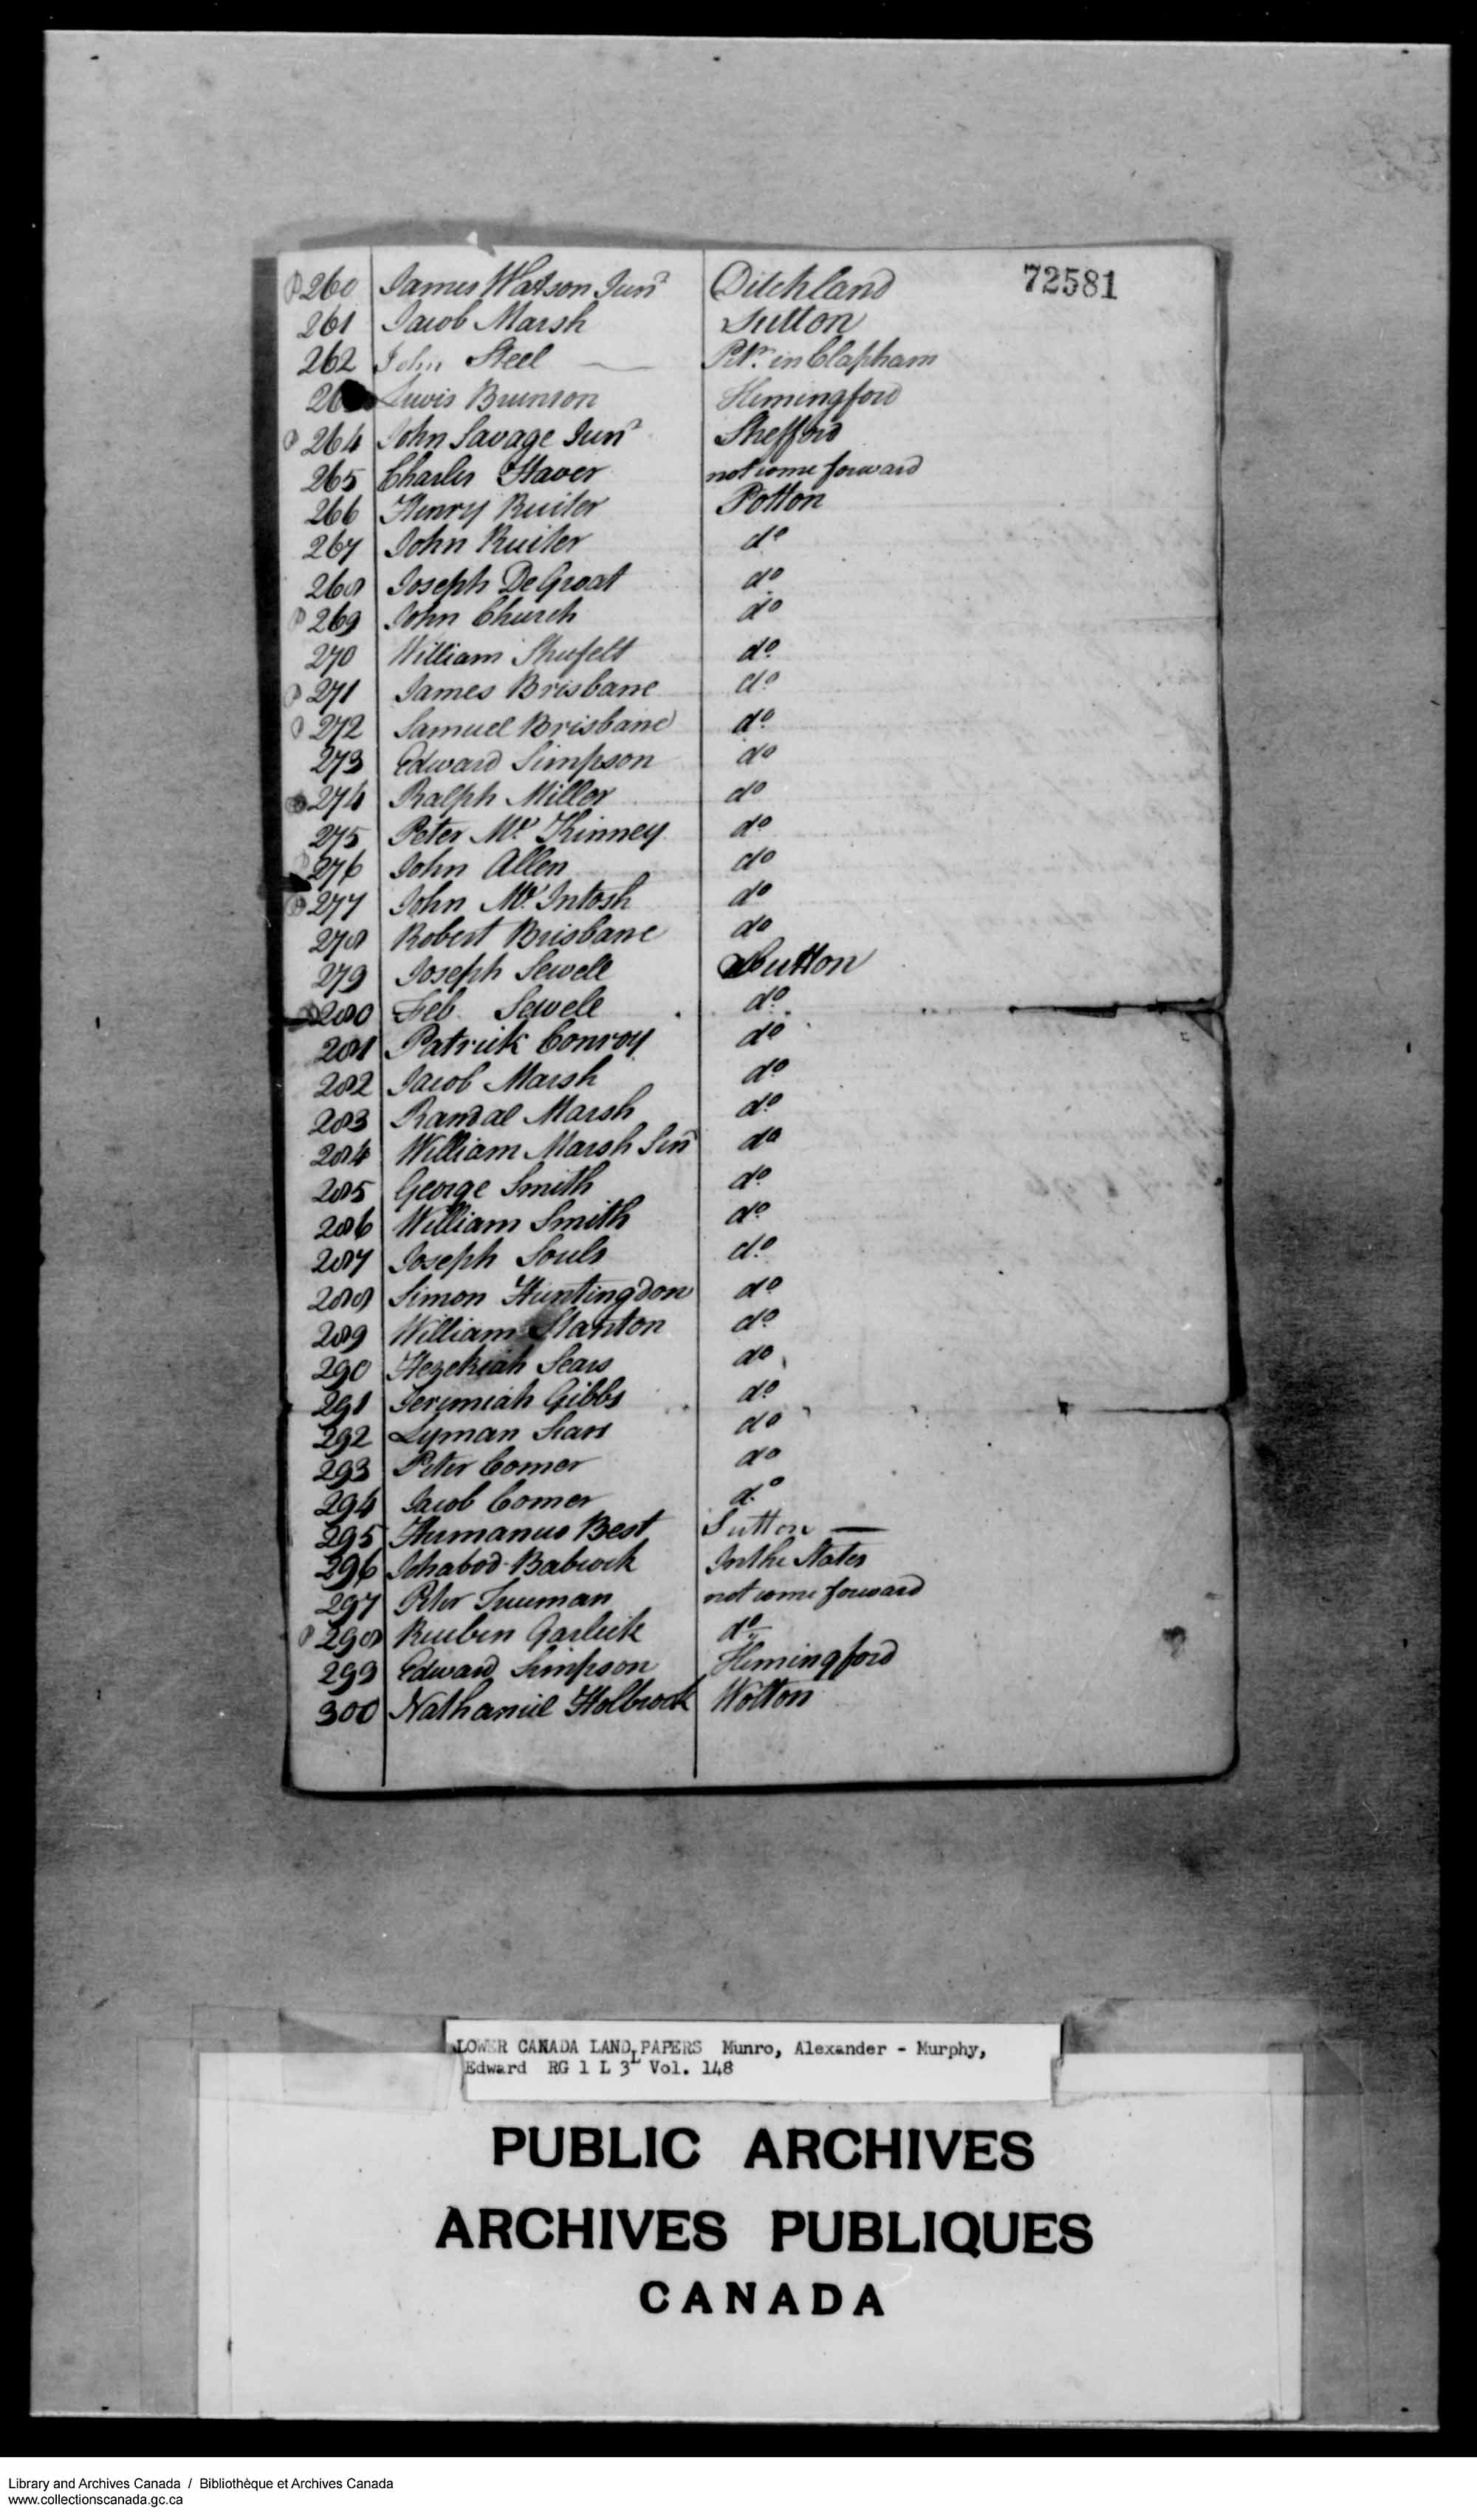 Digitized page of  for Image No.: e008718207